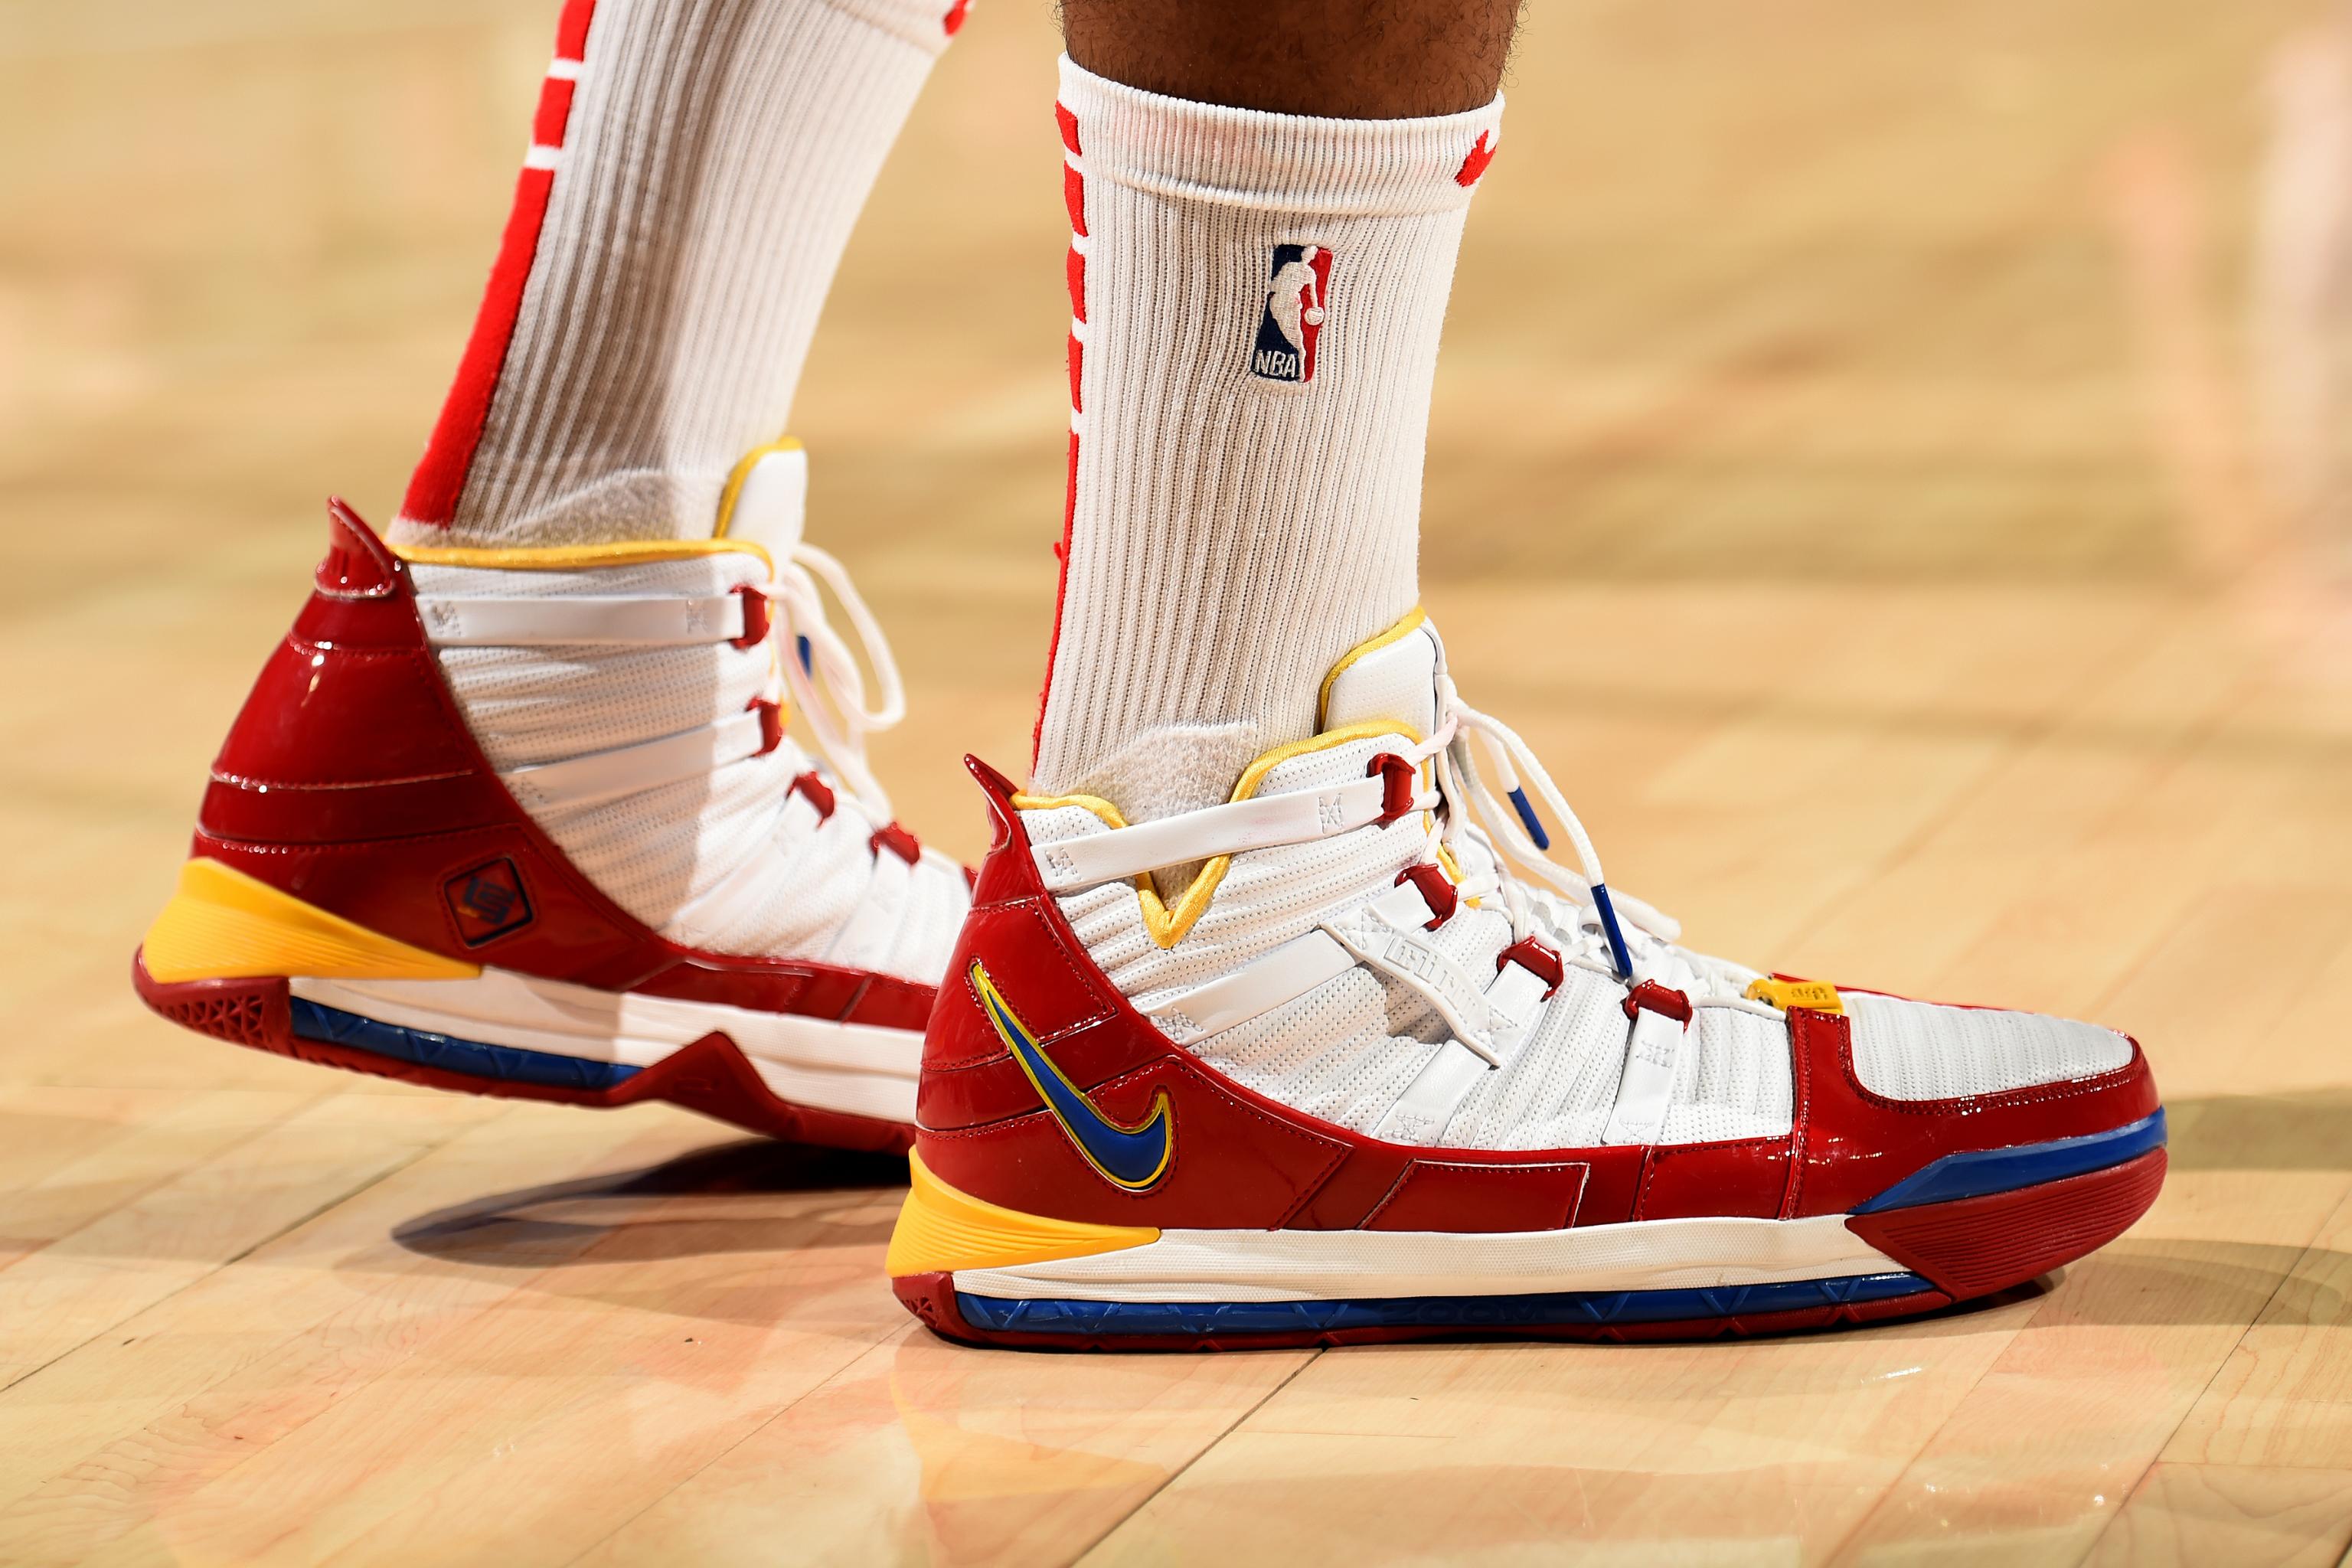 B/R Kicks on X: LeBron arrives for tonight's game wearing the